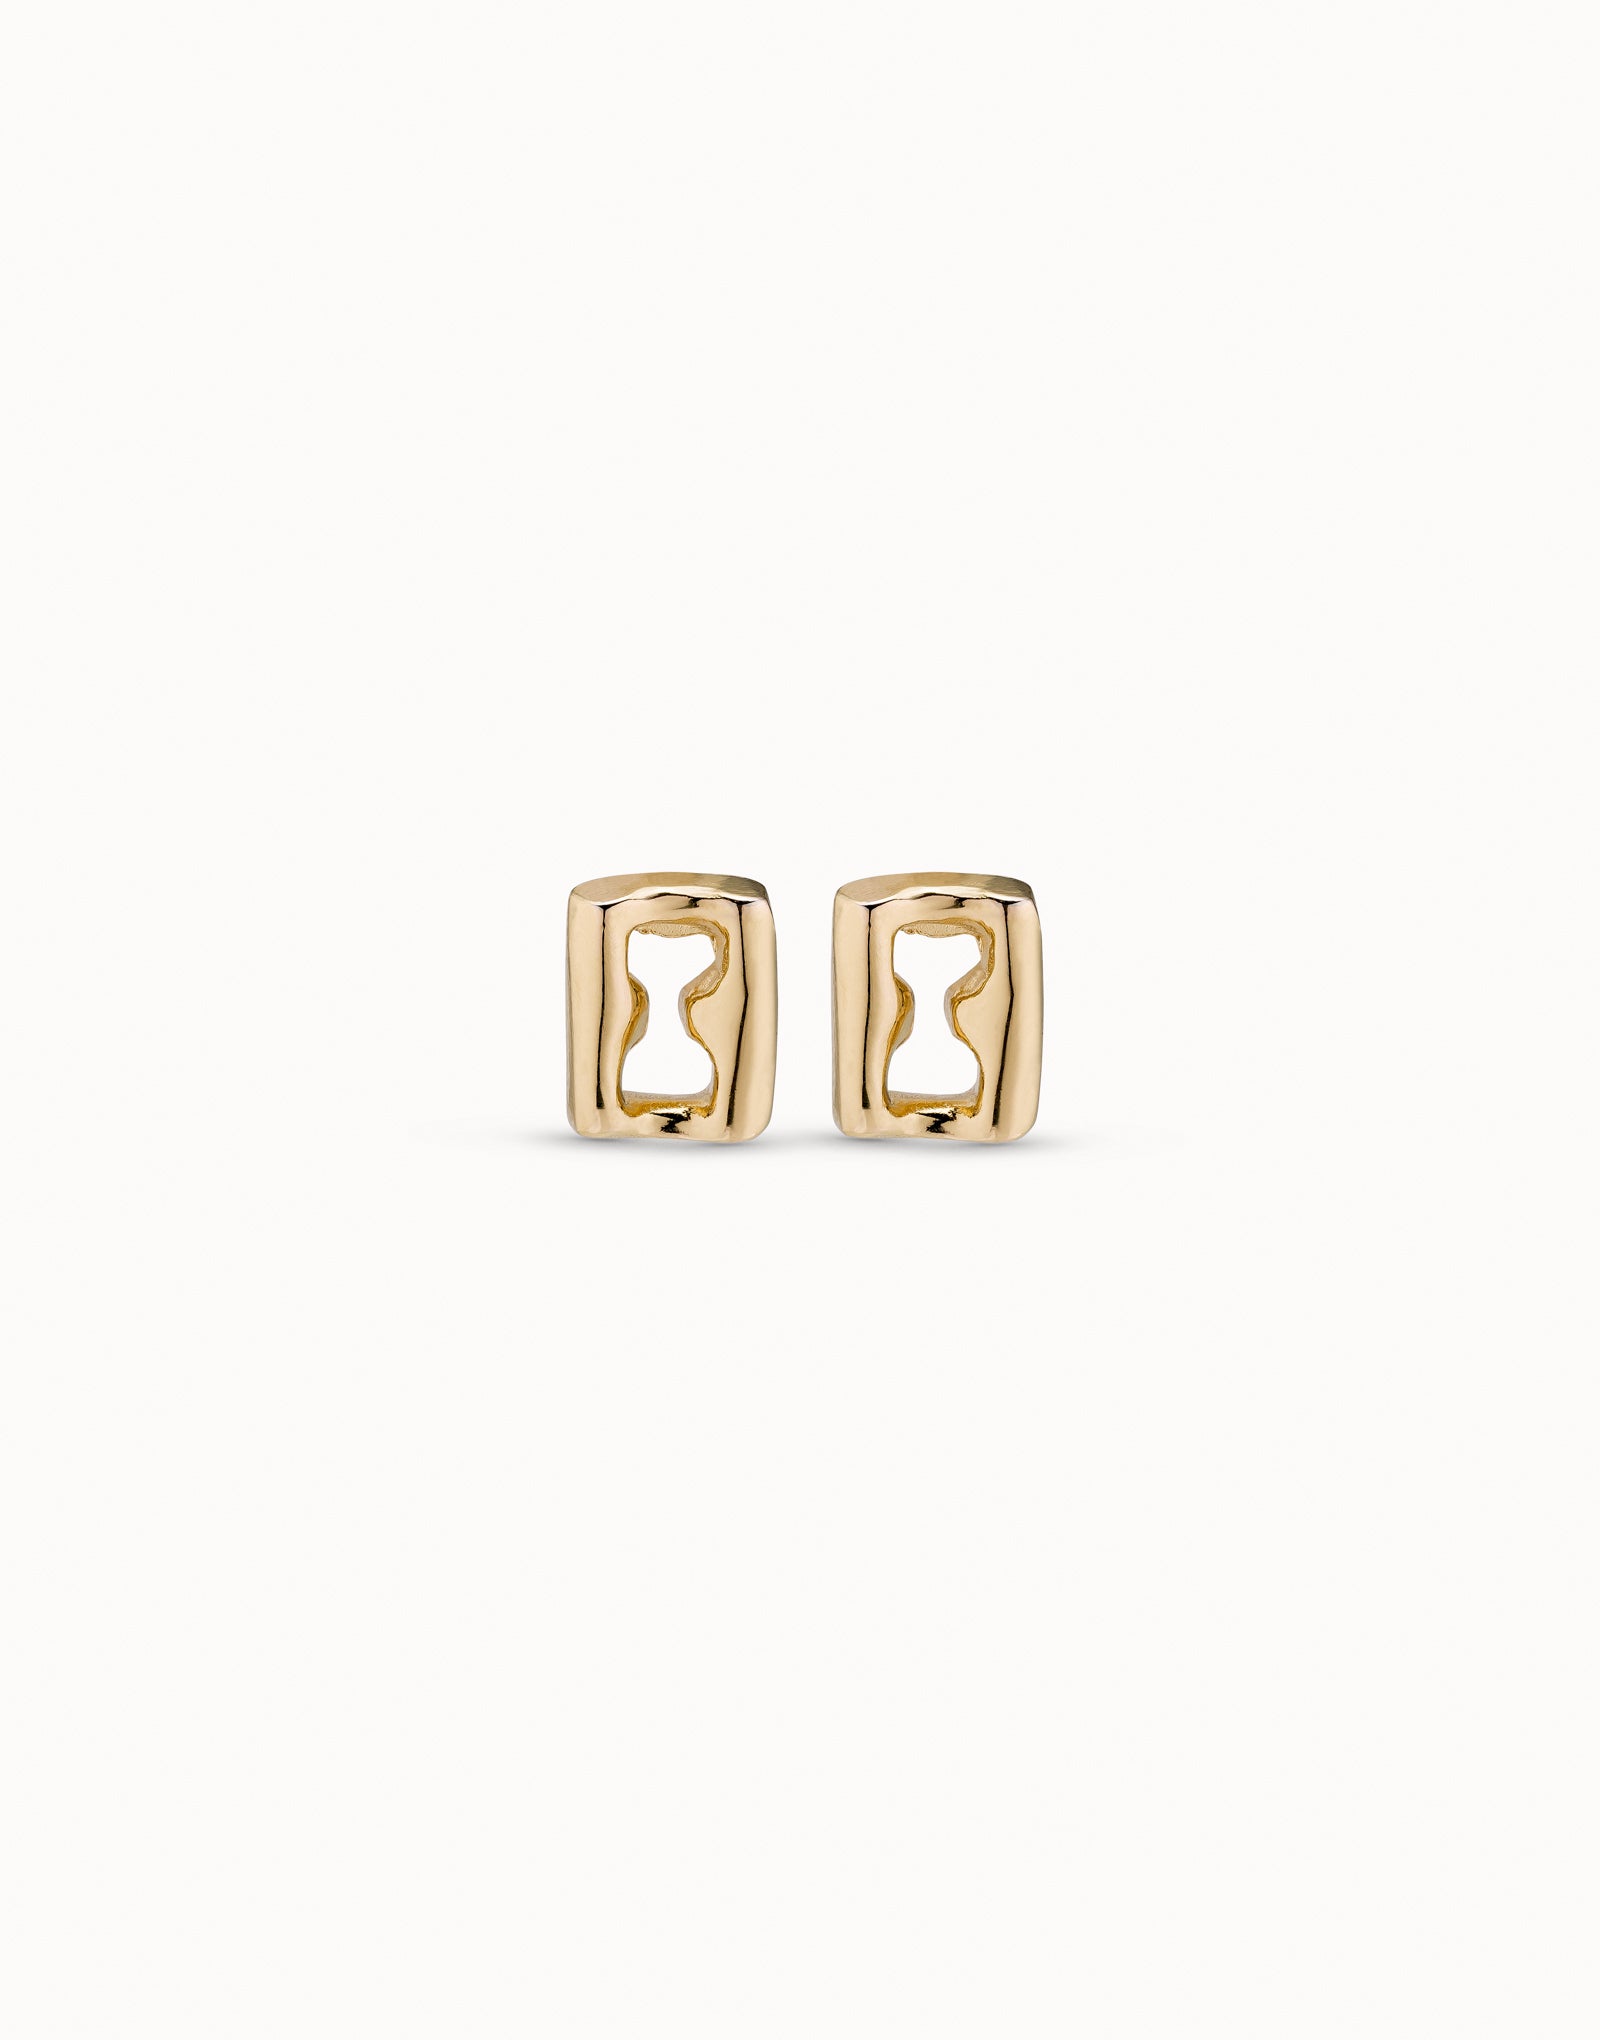 PENDIENTES YES SIR (Gold-Plated) | Uno de 50 | Luby 